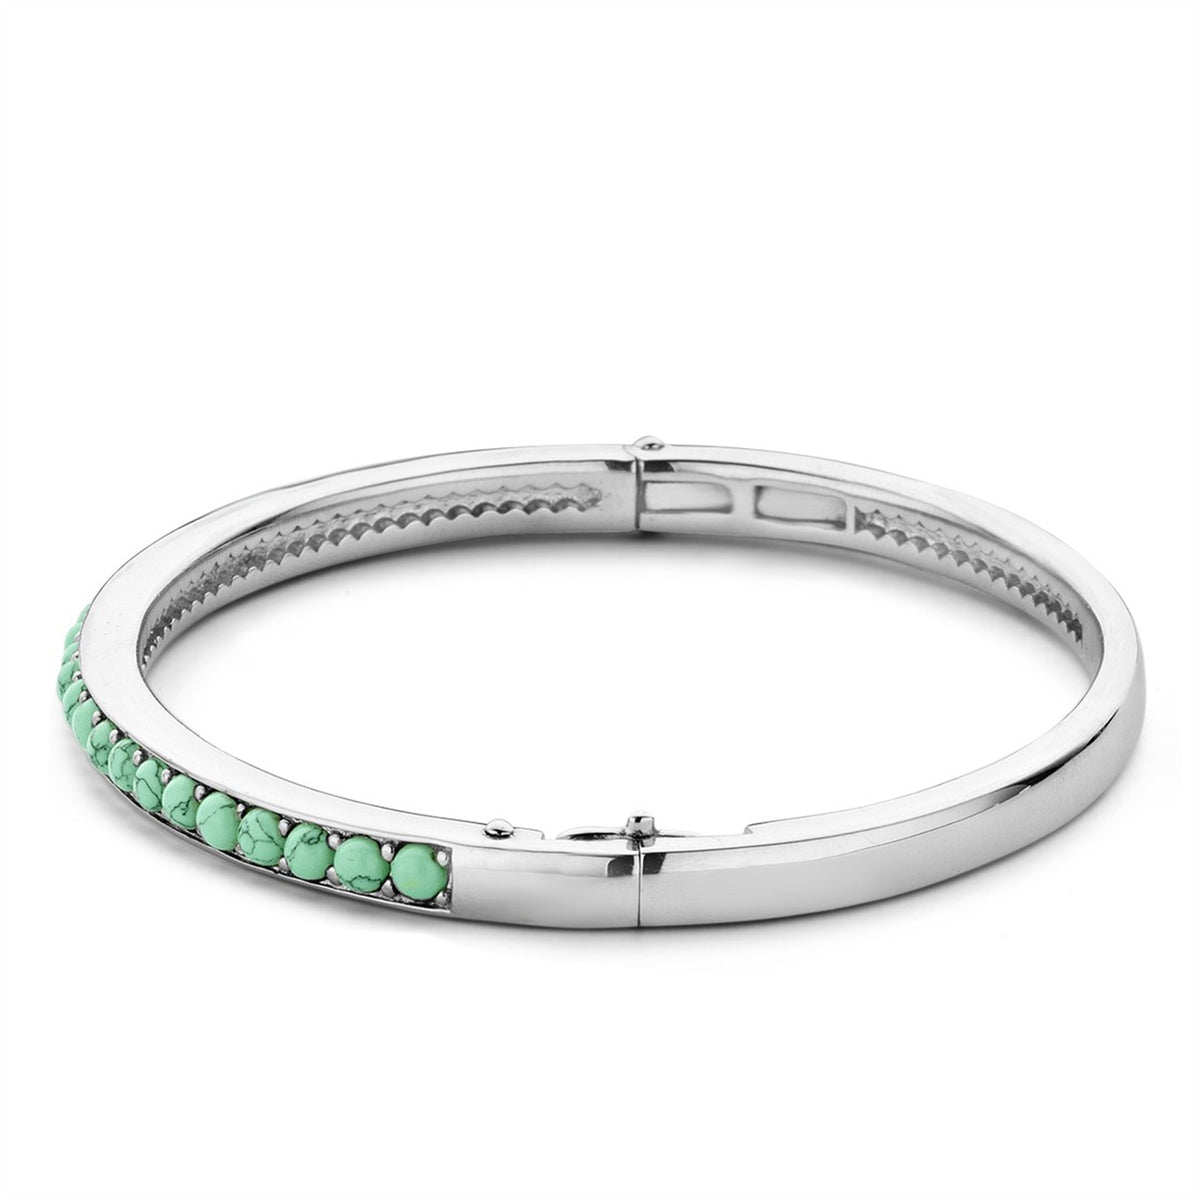 TI SENTO Sterling Silver Hinged Bracelet with Turqoise Colored Stones.